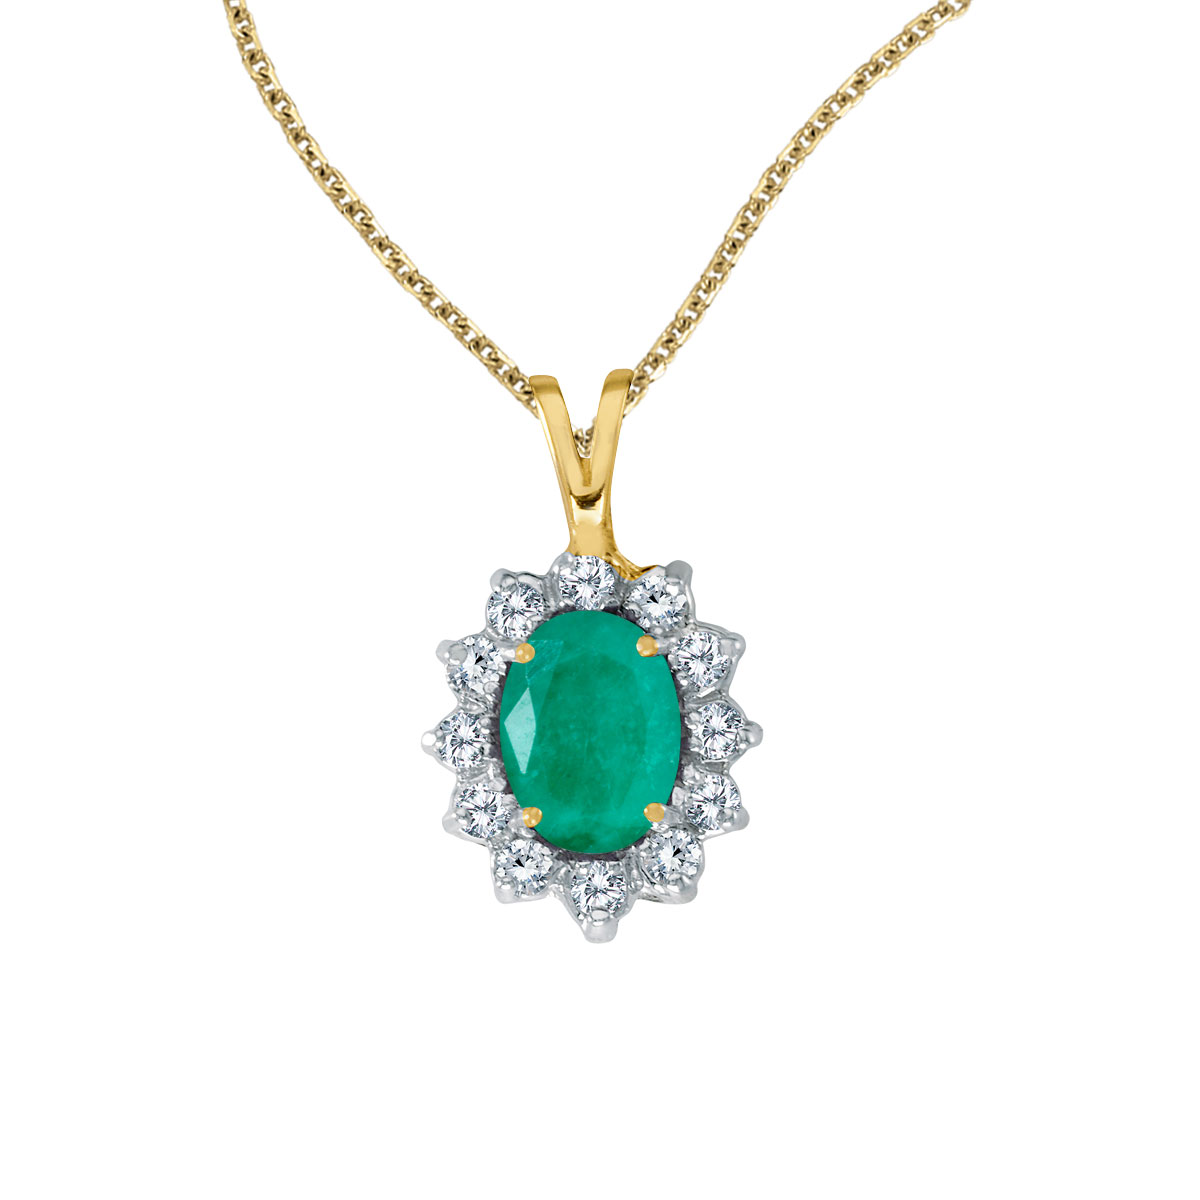 8x6 mm emerald surrounded by .30 carats of shimmering diamonds set in 14k yellow gold. Perfect fo...